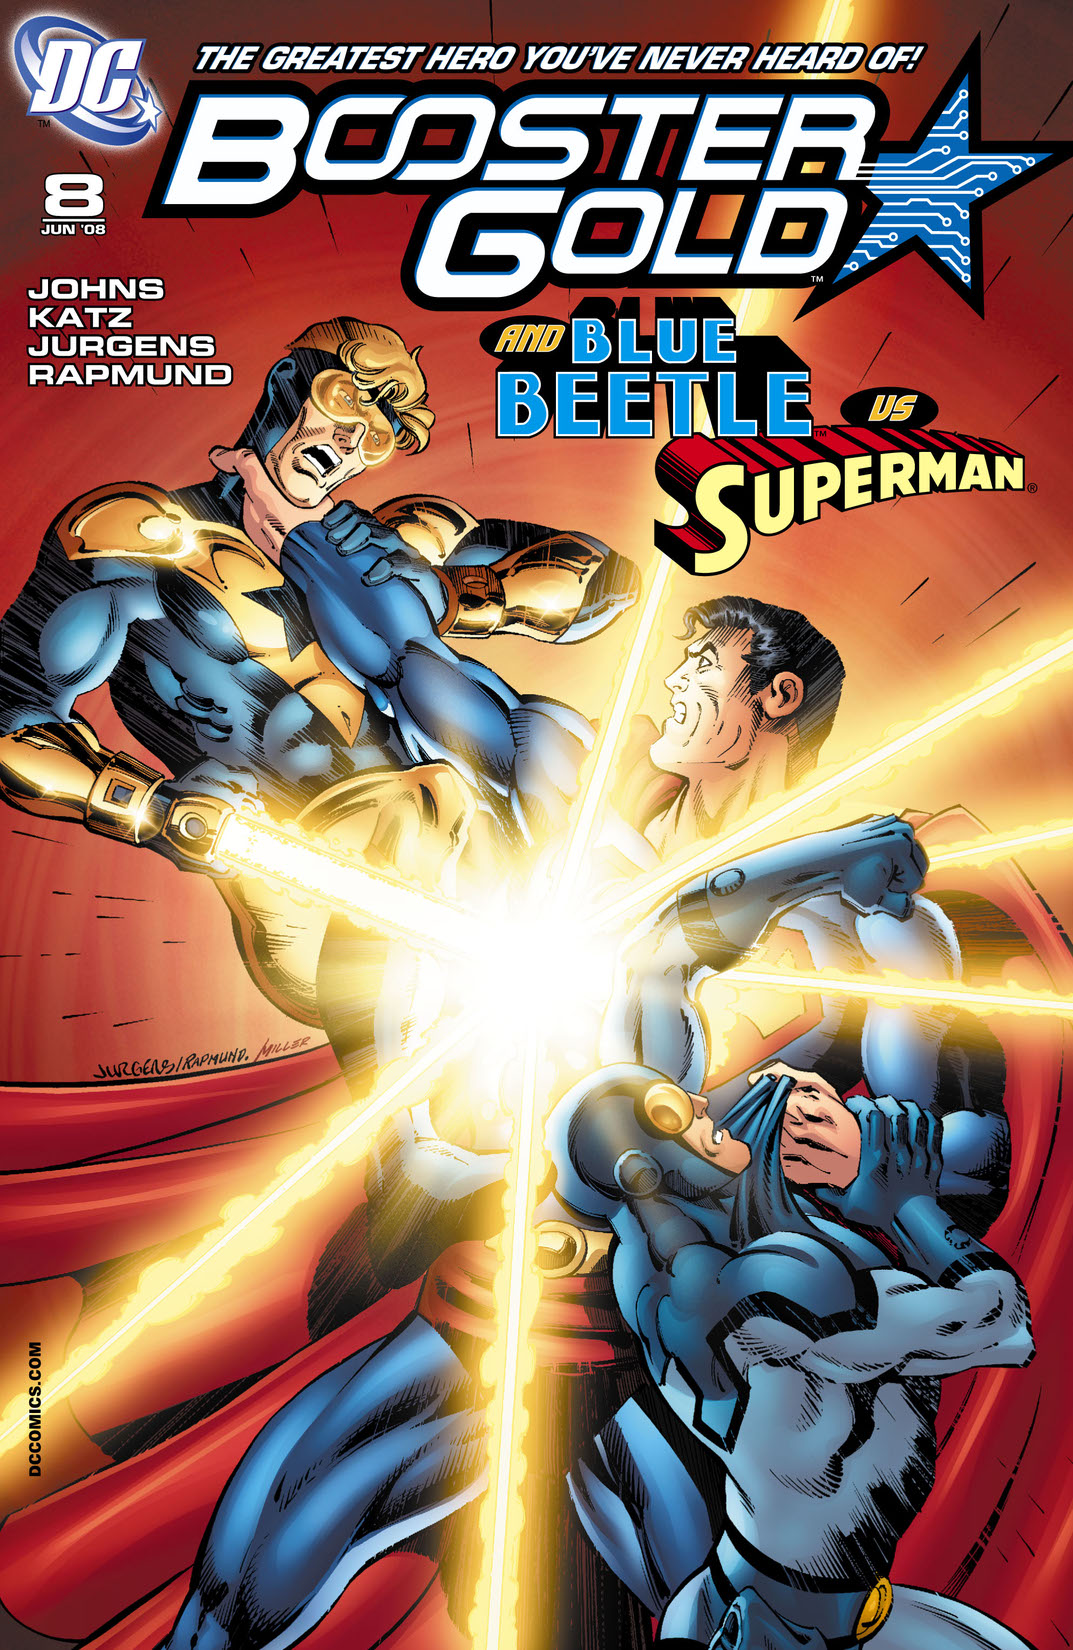 Booster Gold (2007-) #8 preview images